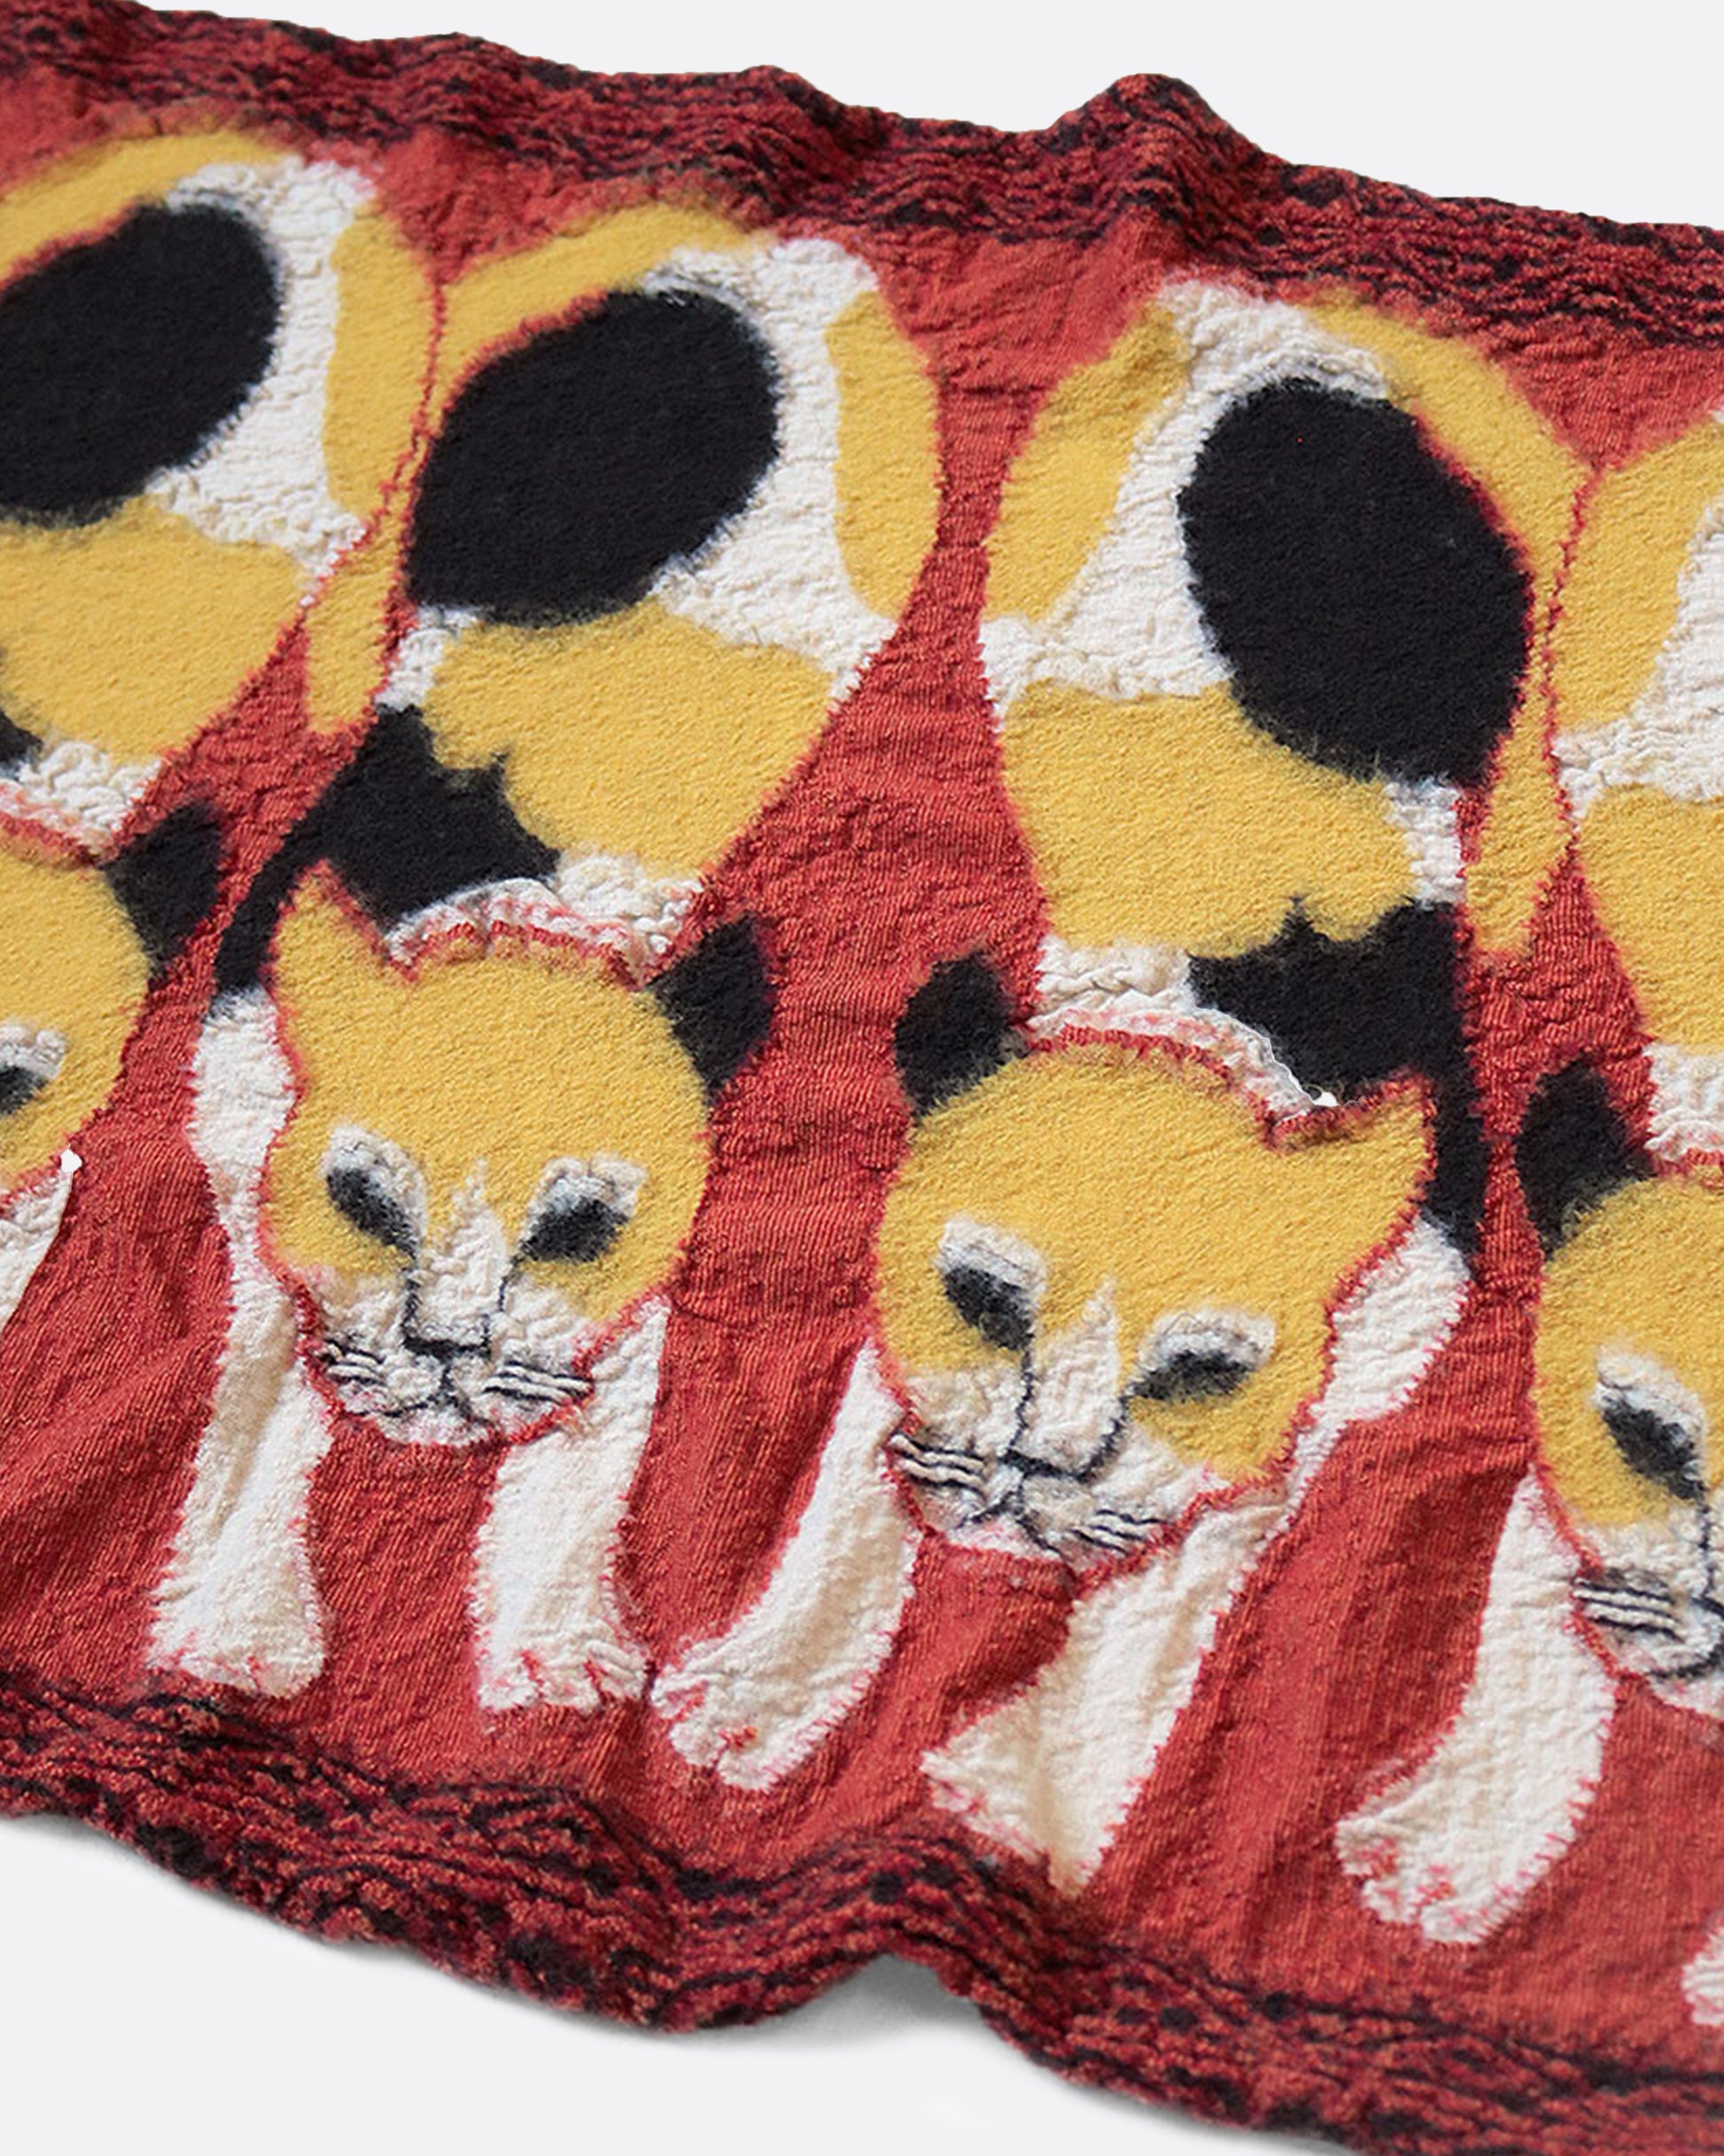 A fluffy wool scarf lined with calico cats.